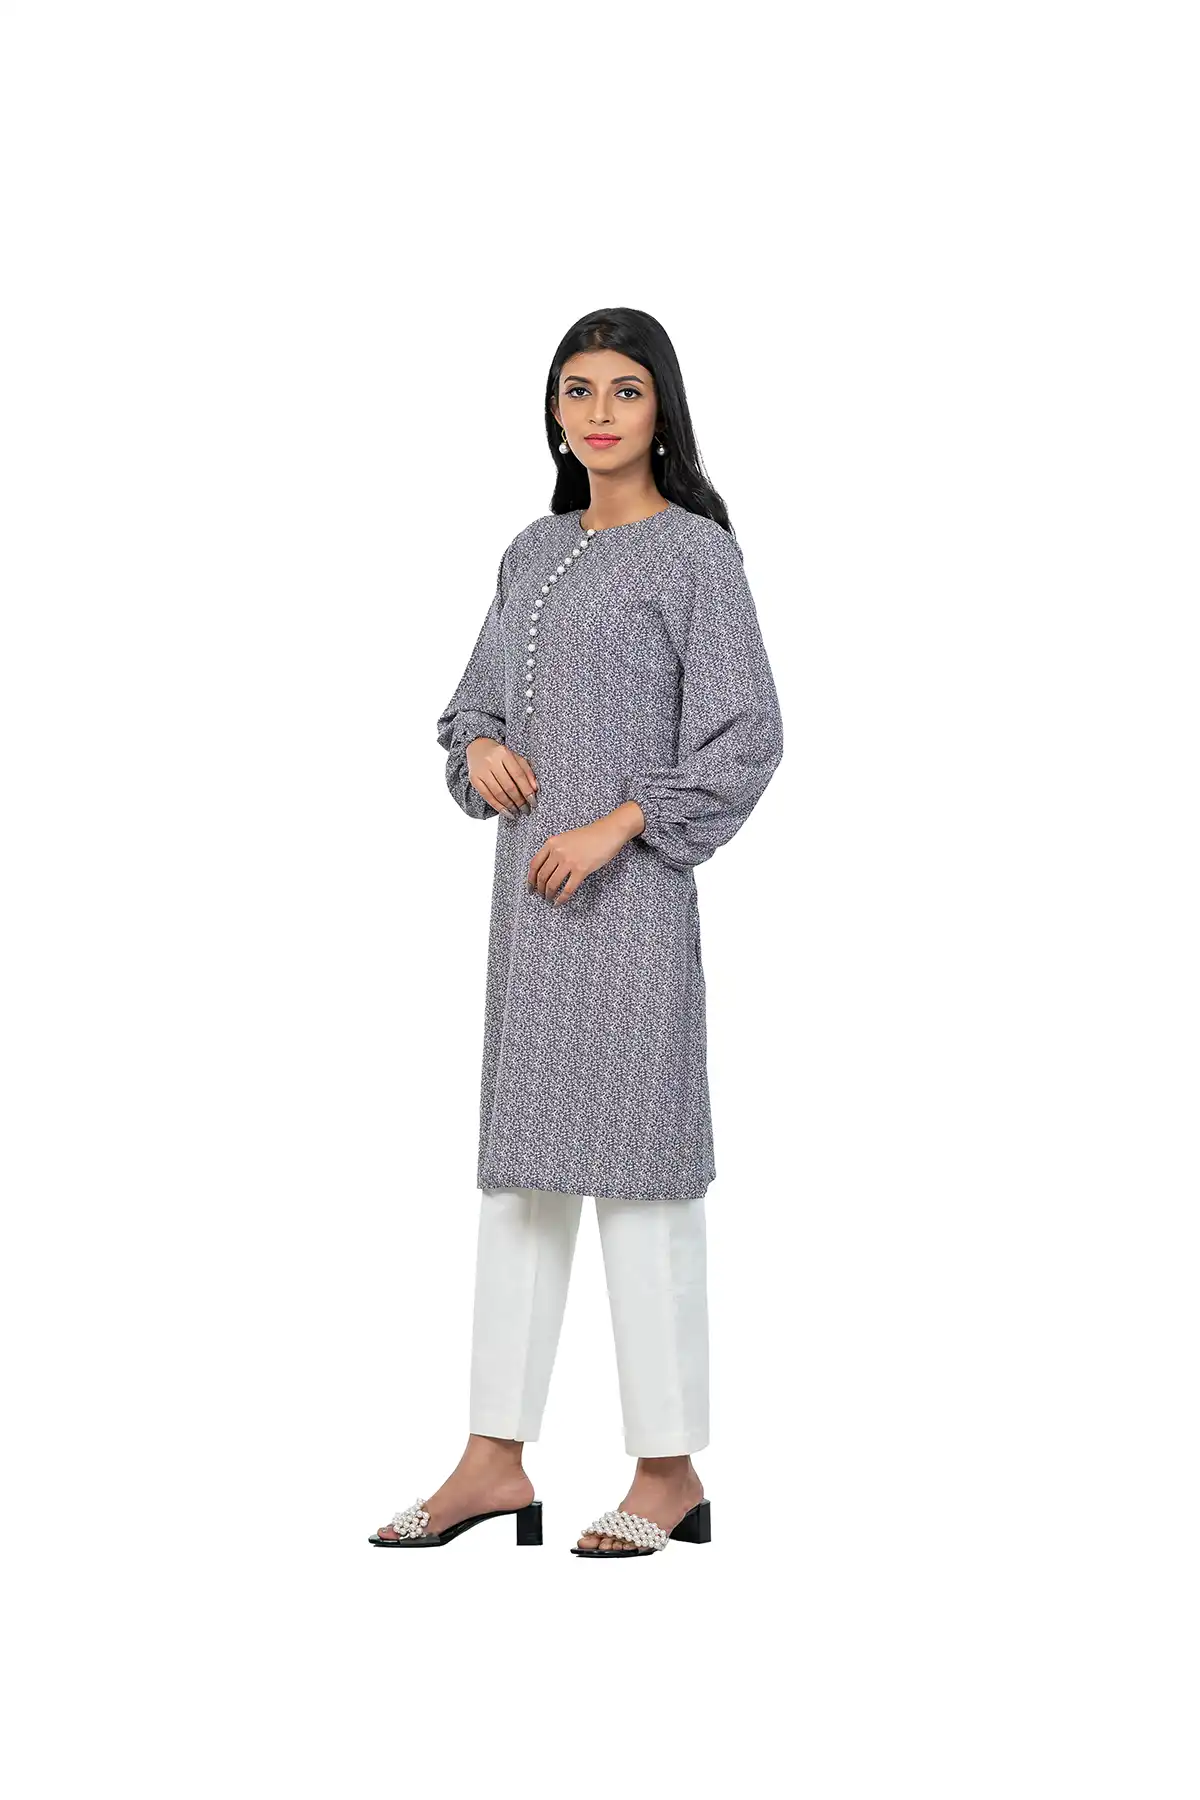 Women Mid Length Kurti With Pearl Buttons - Multi-colored